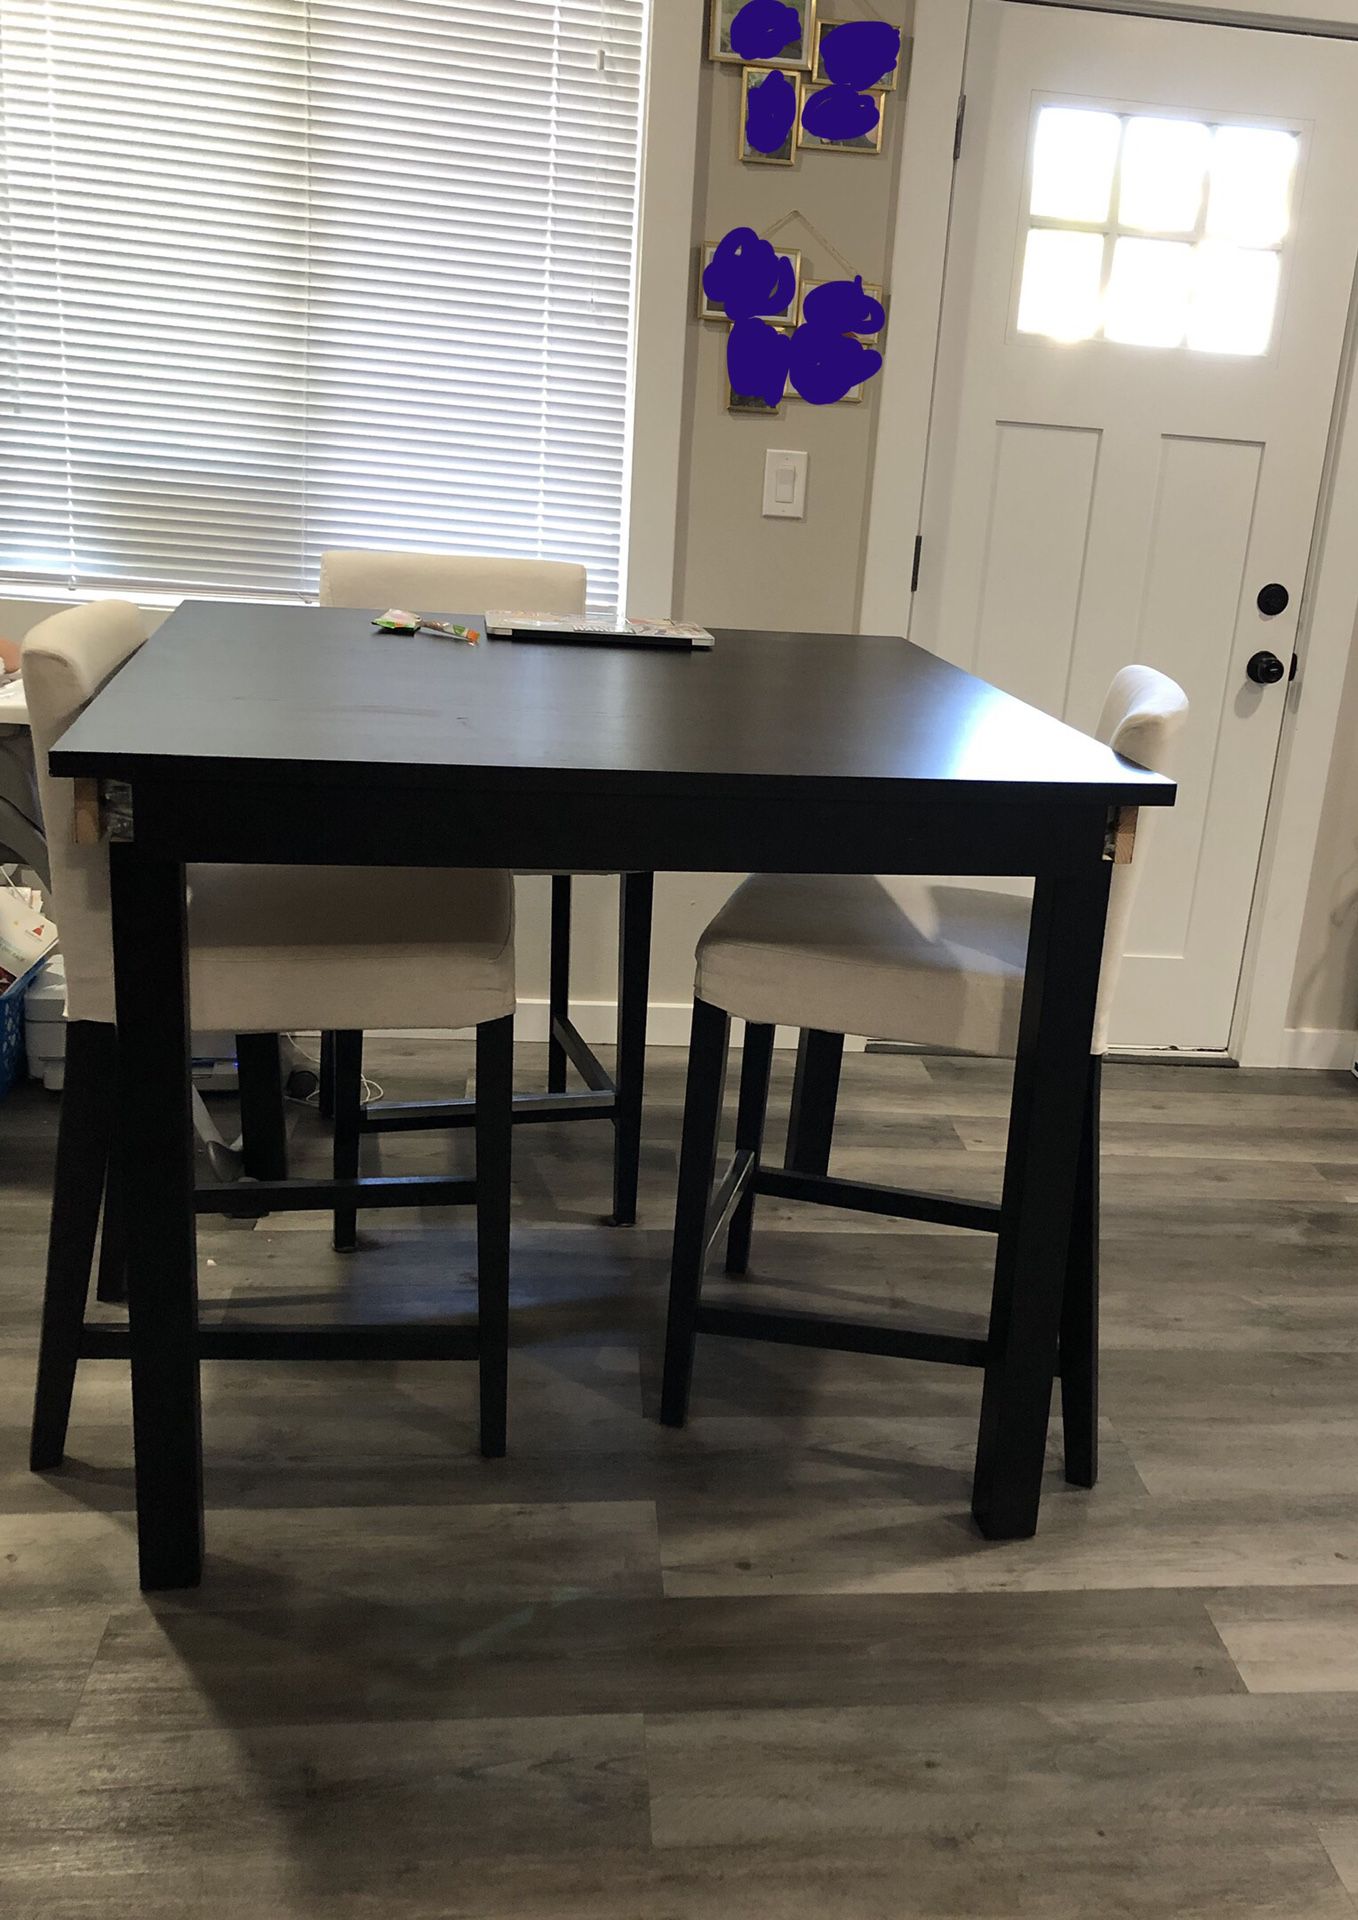 Ikea kitchen table only